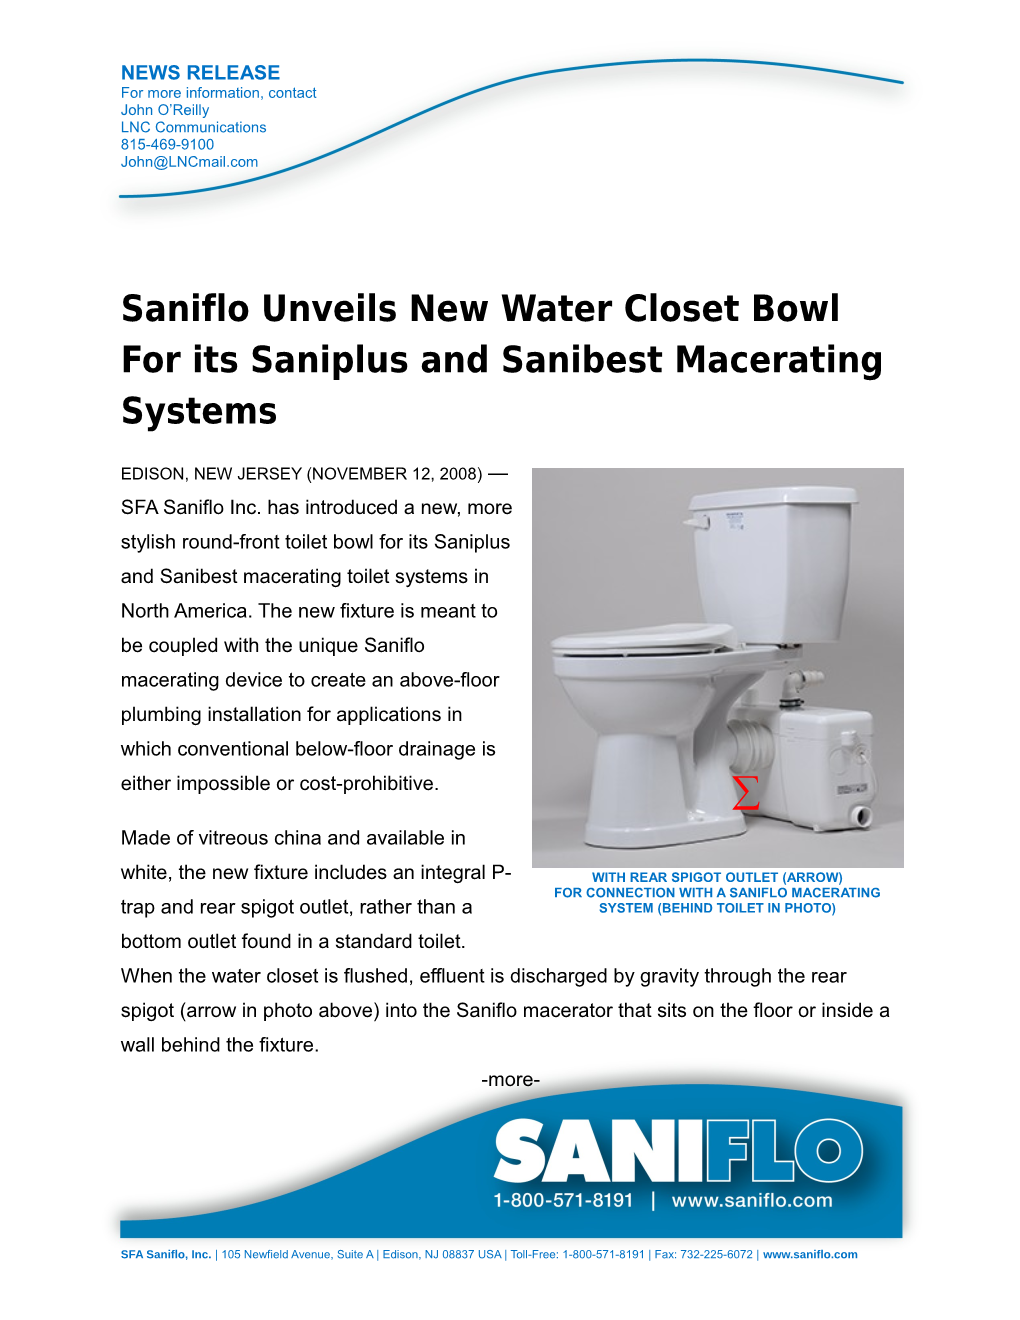 Sanistar Combines Space-Saving, Modern Design with Superb Water Savings, Using Only 1 s1